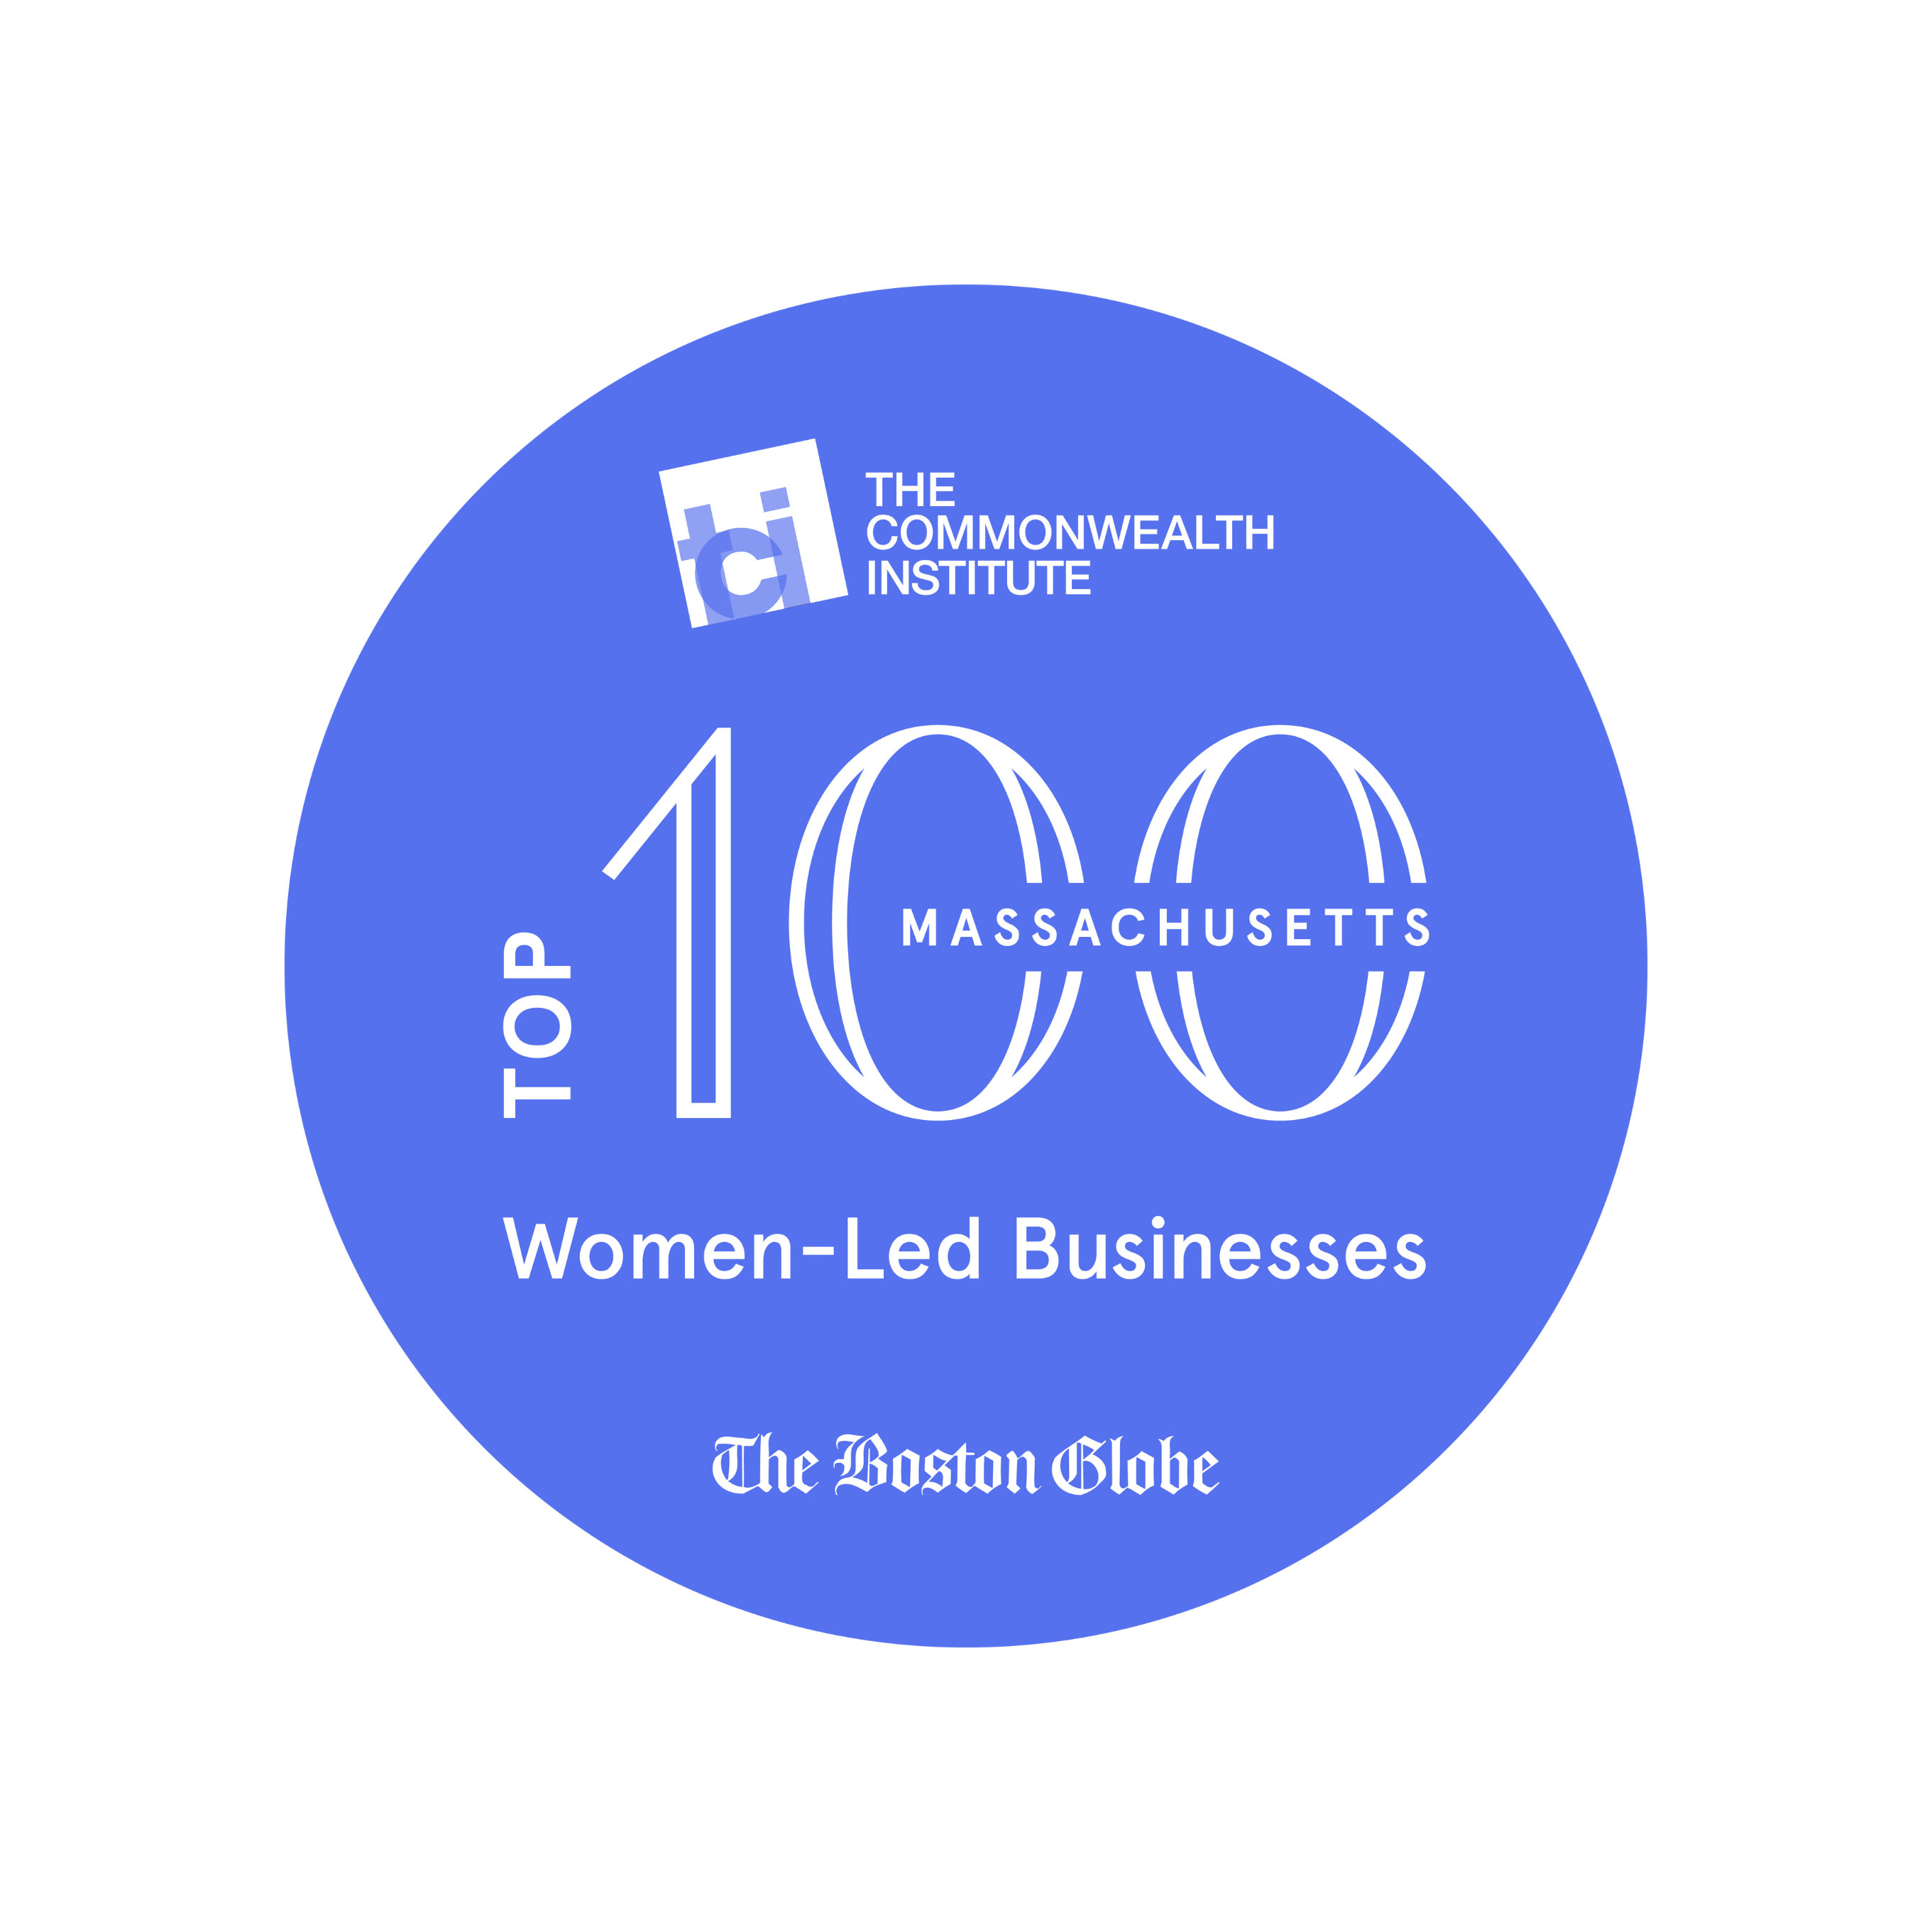 A Top 100 Women-Led Business